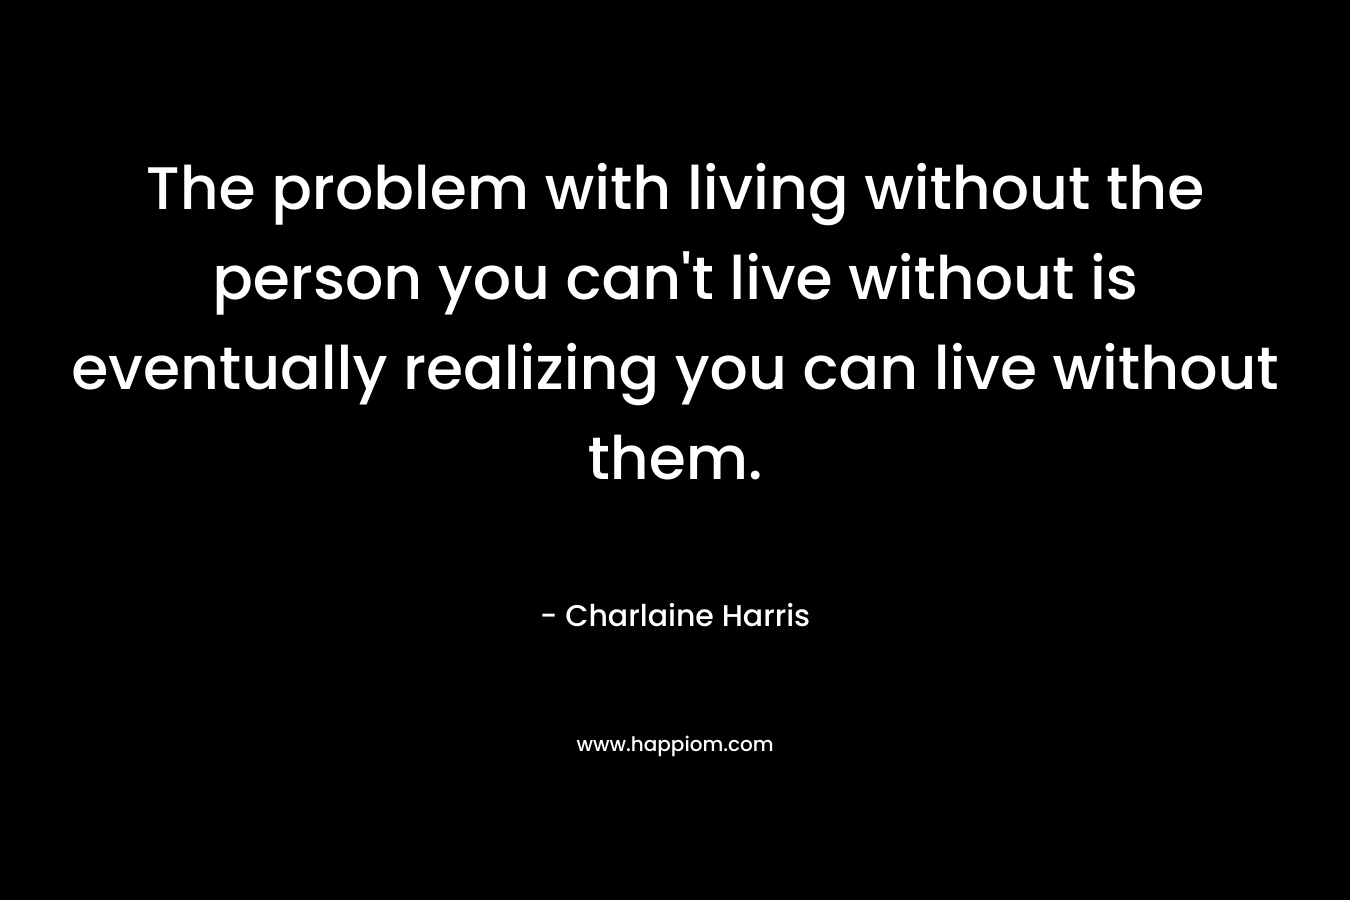 The problem with living without the person you can’t live without is eventually realizing you can live without them. – Charlaine Harris